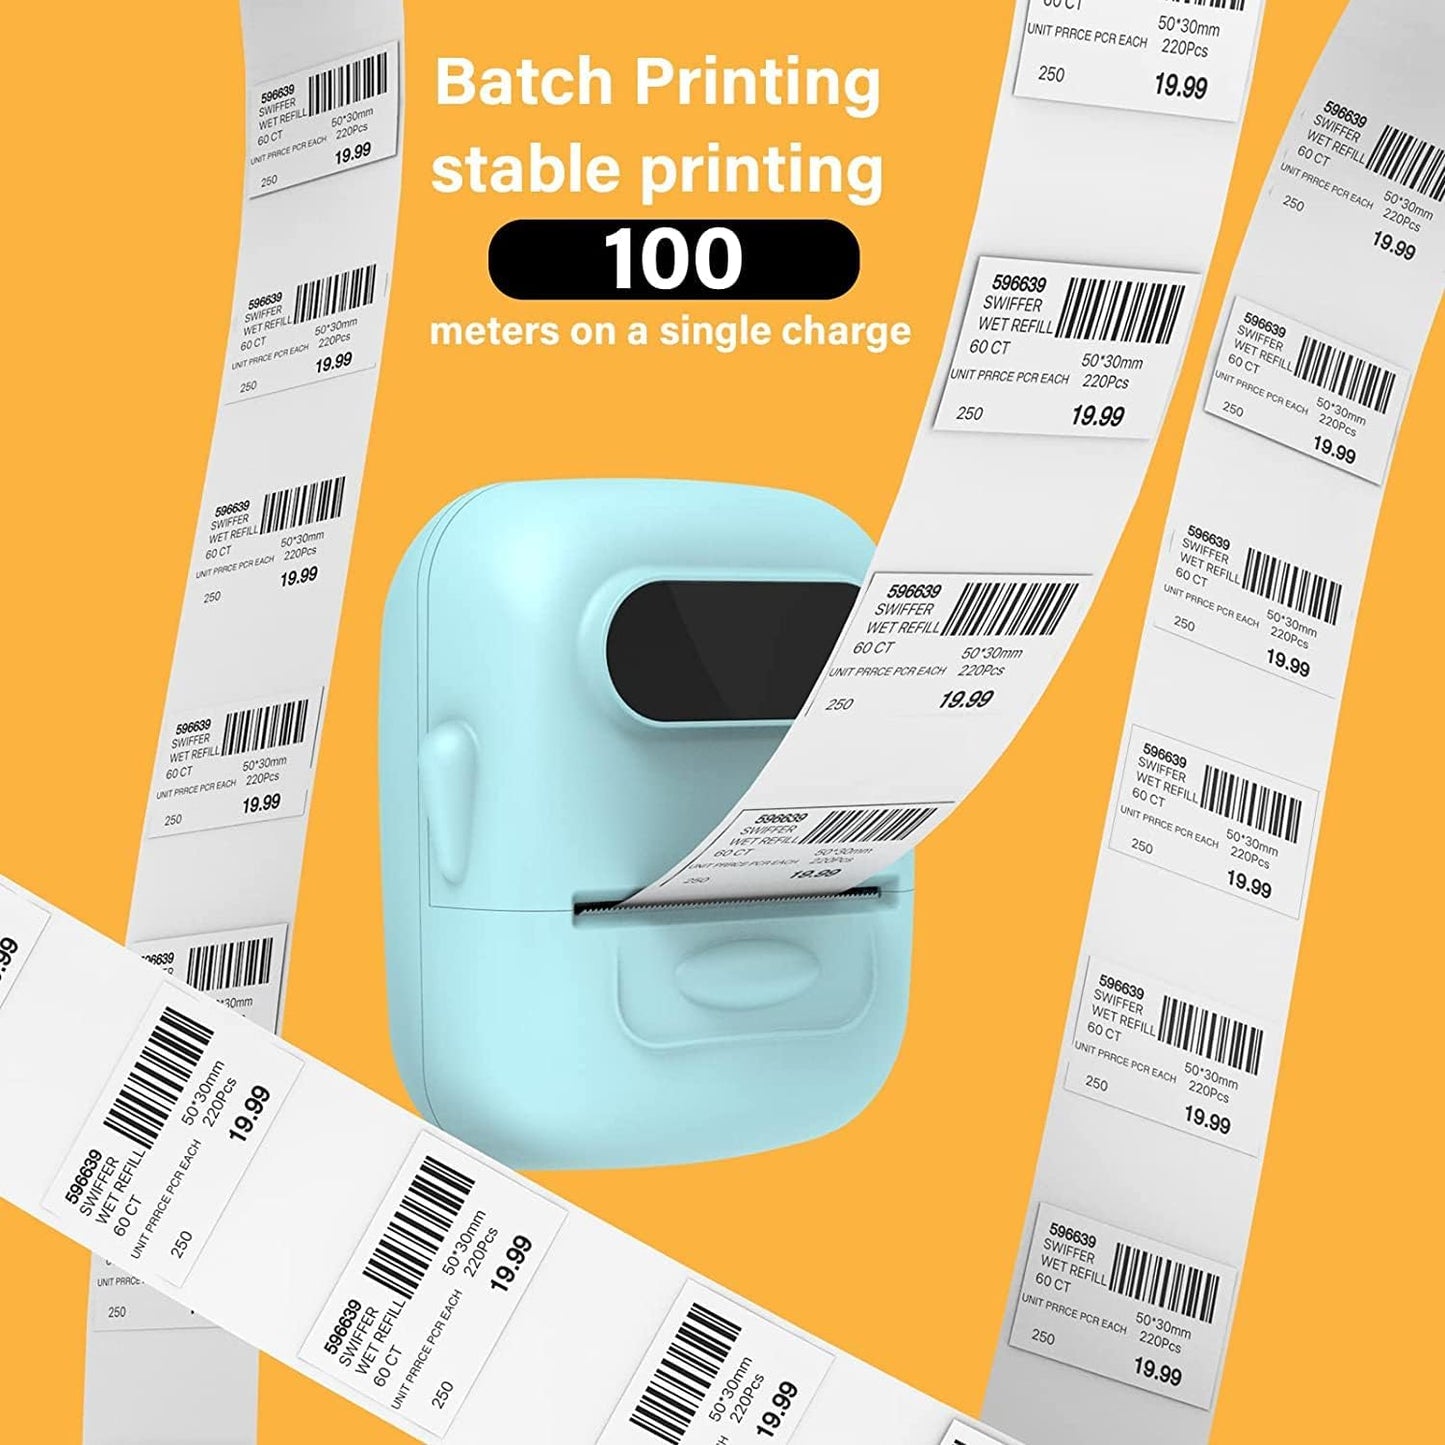 Portable Bluetooth Thermal Label Maker Machine with Barcode Printer Ideal for Retail, Small Business, and Home Office Use - Includes 1 Roll of Blue Labels"